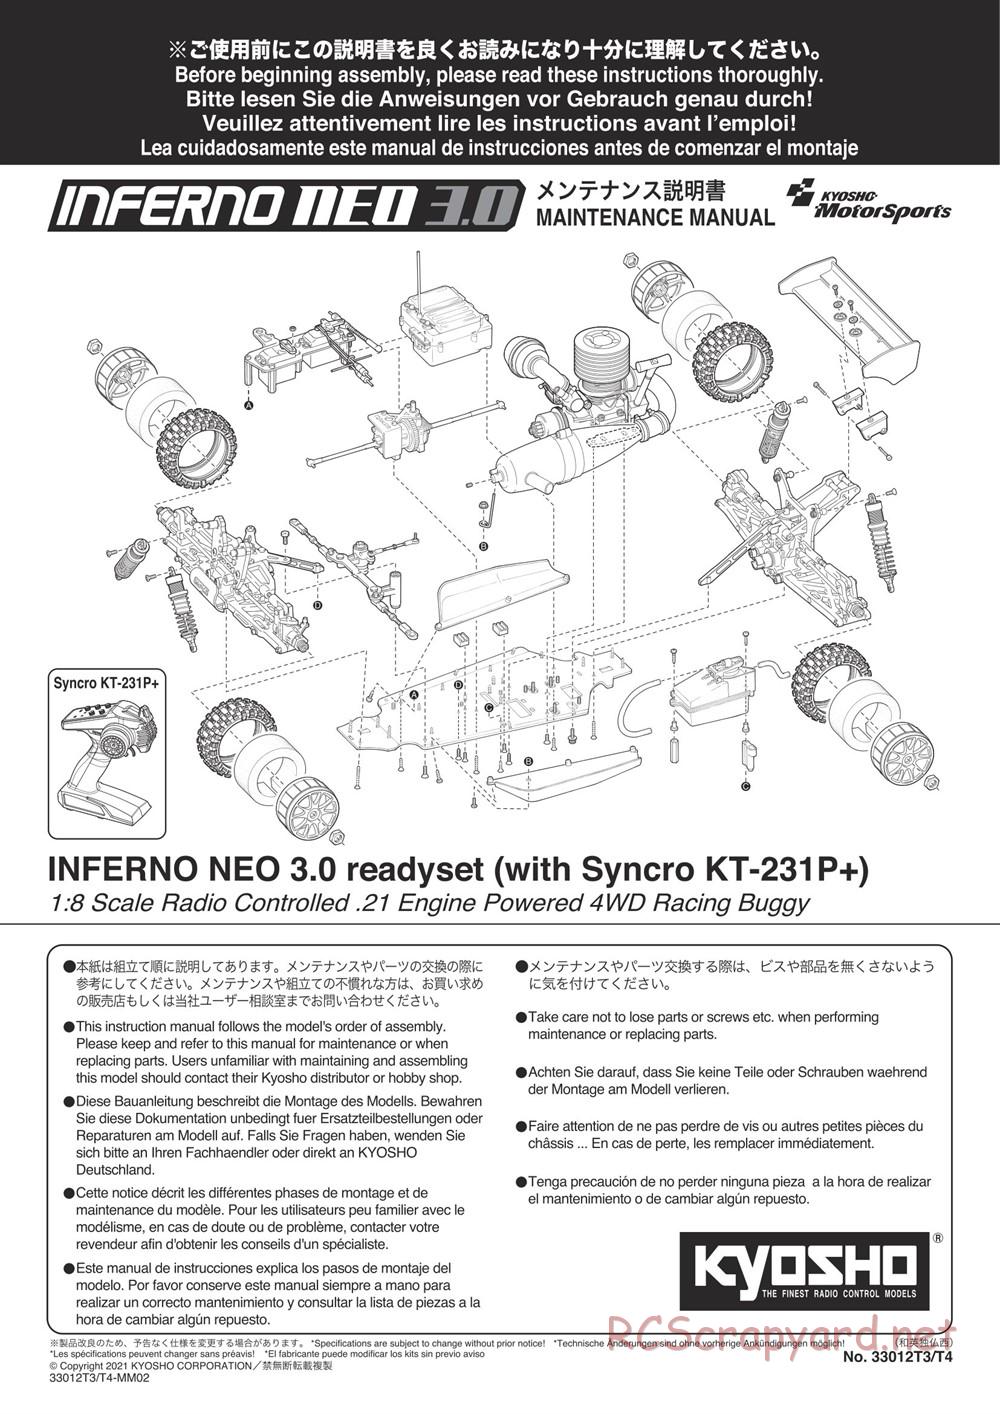 Kyosho - Inferno Neo 3.0 - Manual - Page 1